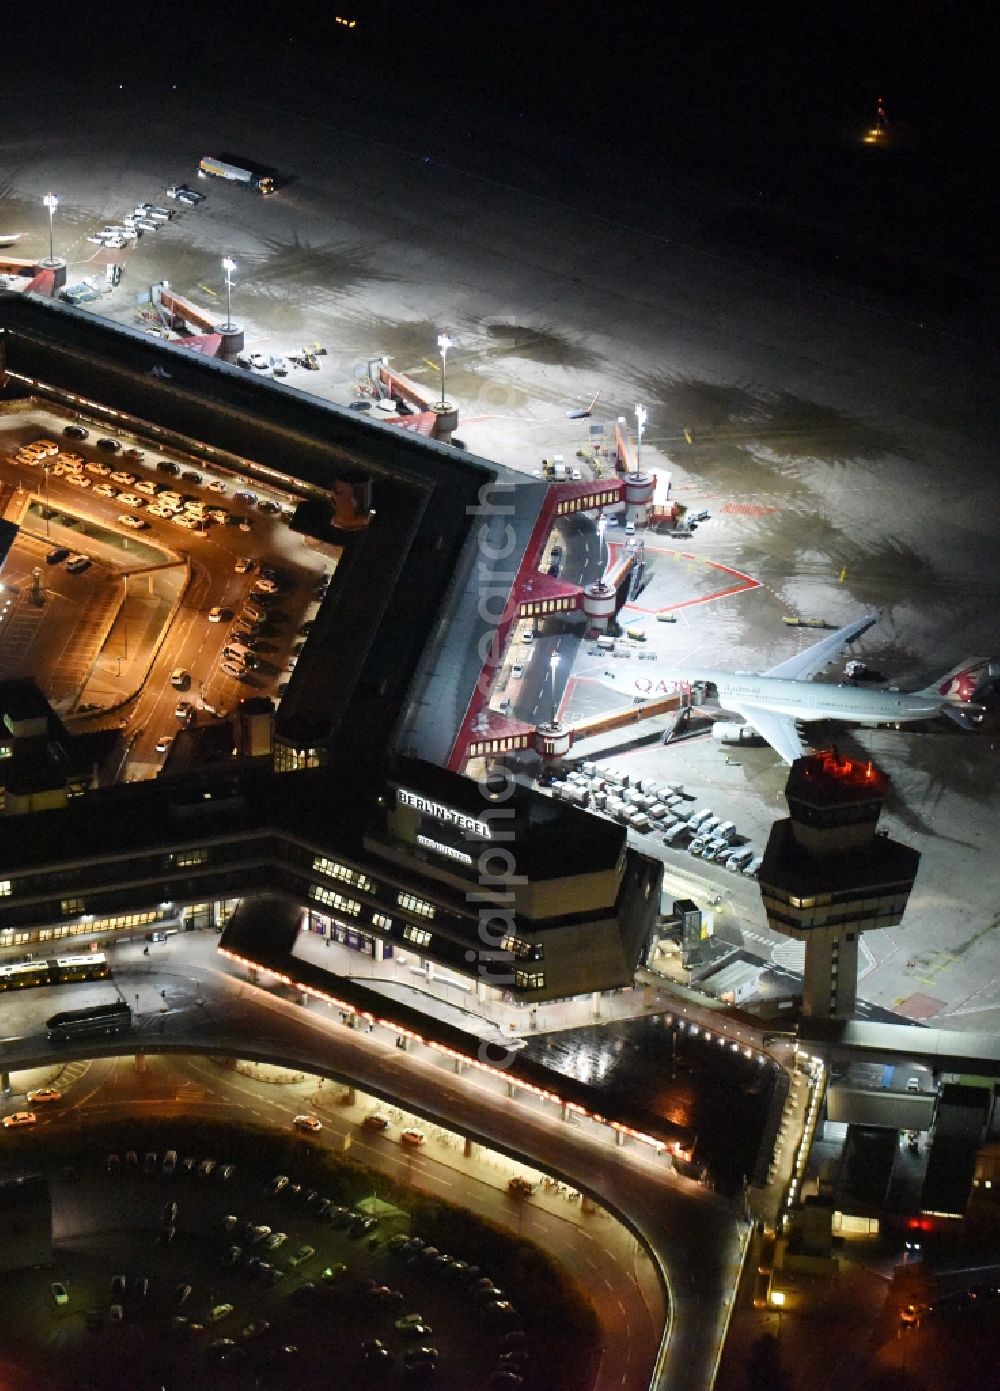 Berlin from above - Night flight operations at the terminal of the airport Berlin - Tegel